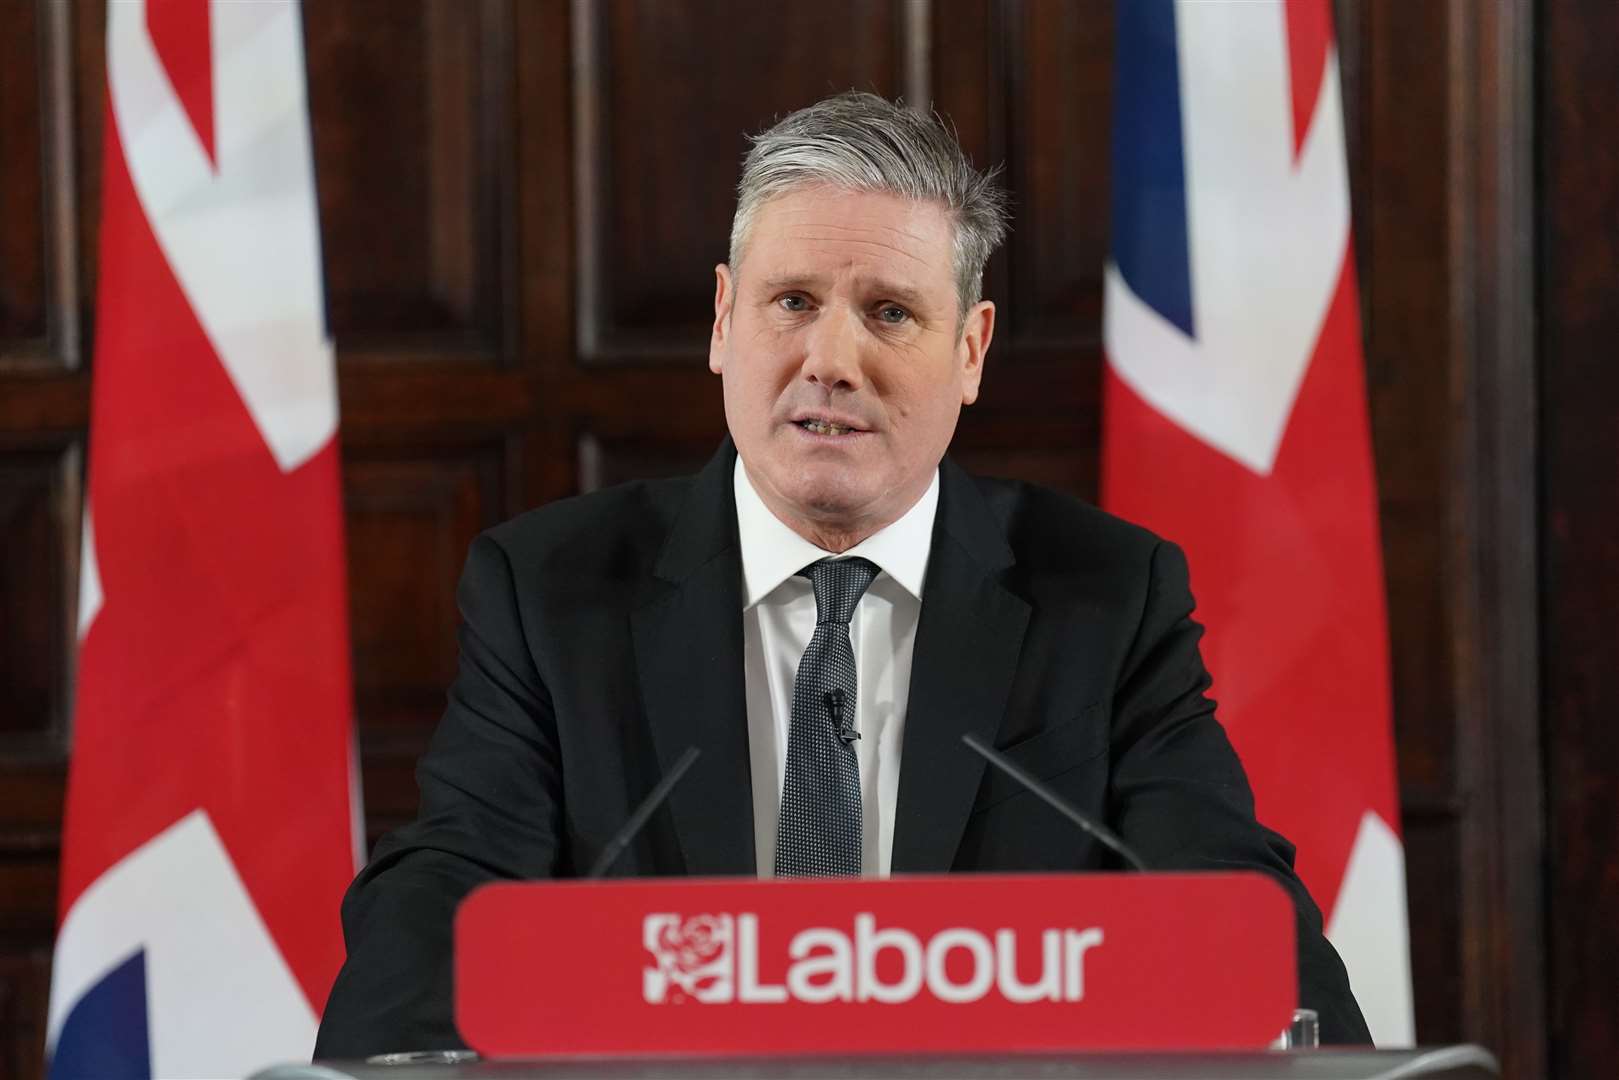 Labour Party leader Sir Keir Starmer ruled out Mr Corbyn standing for Labour at the next election (Stefan Rousseau/PA)